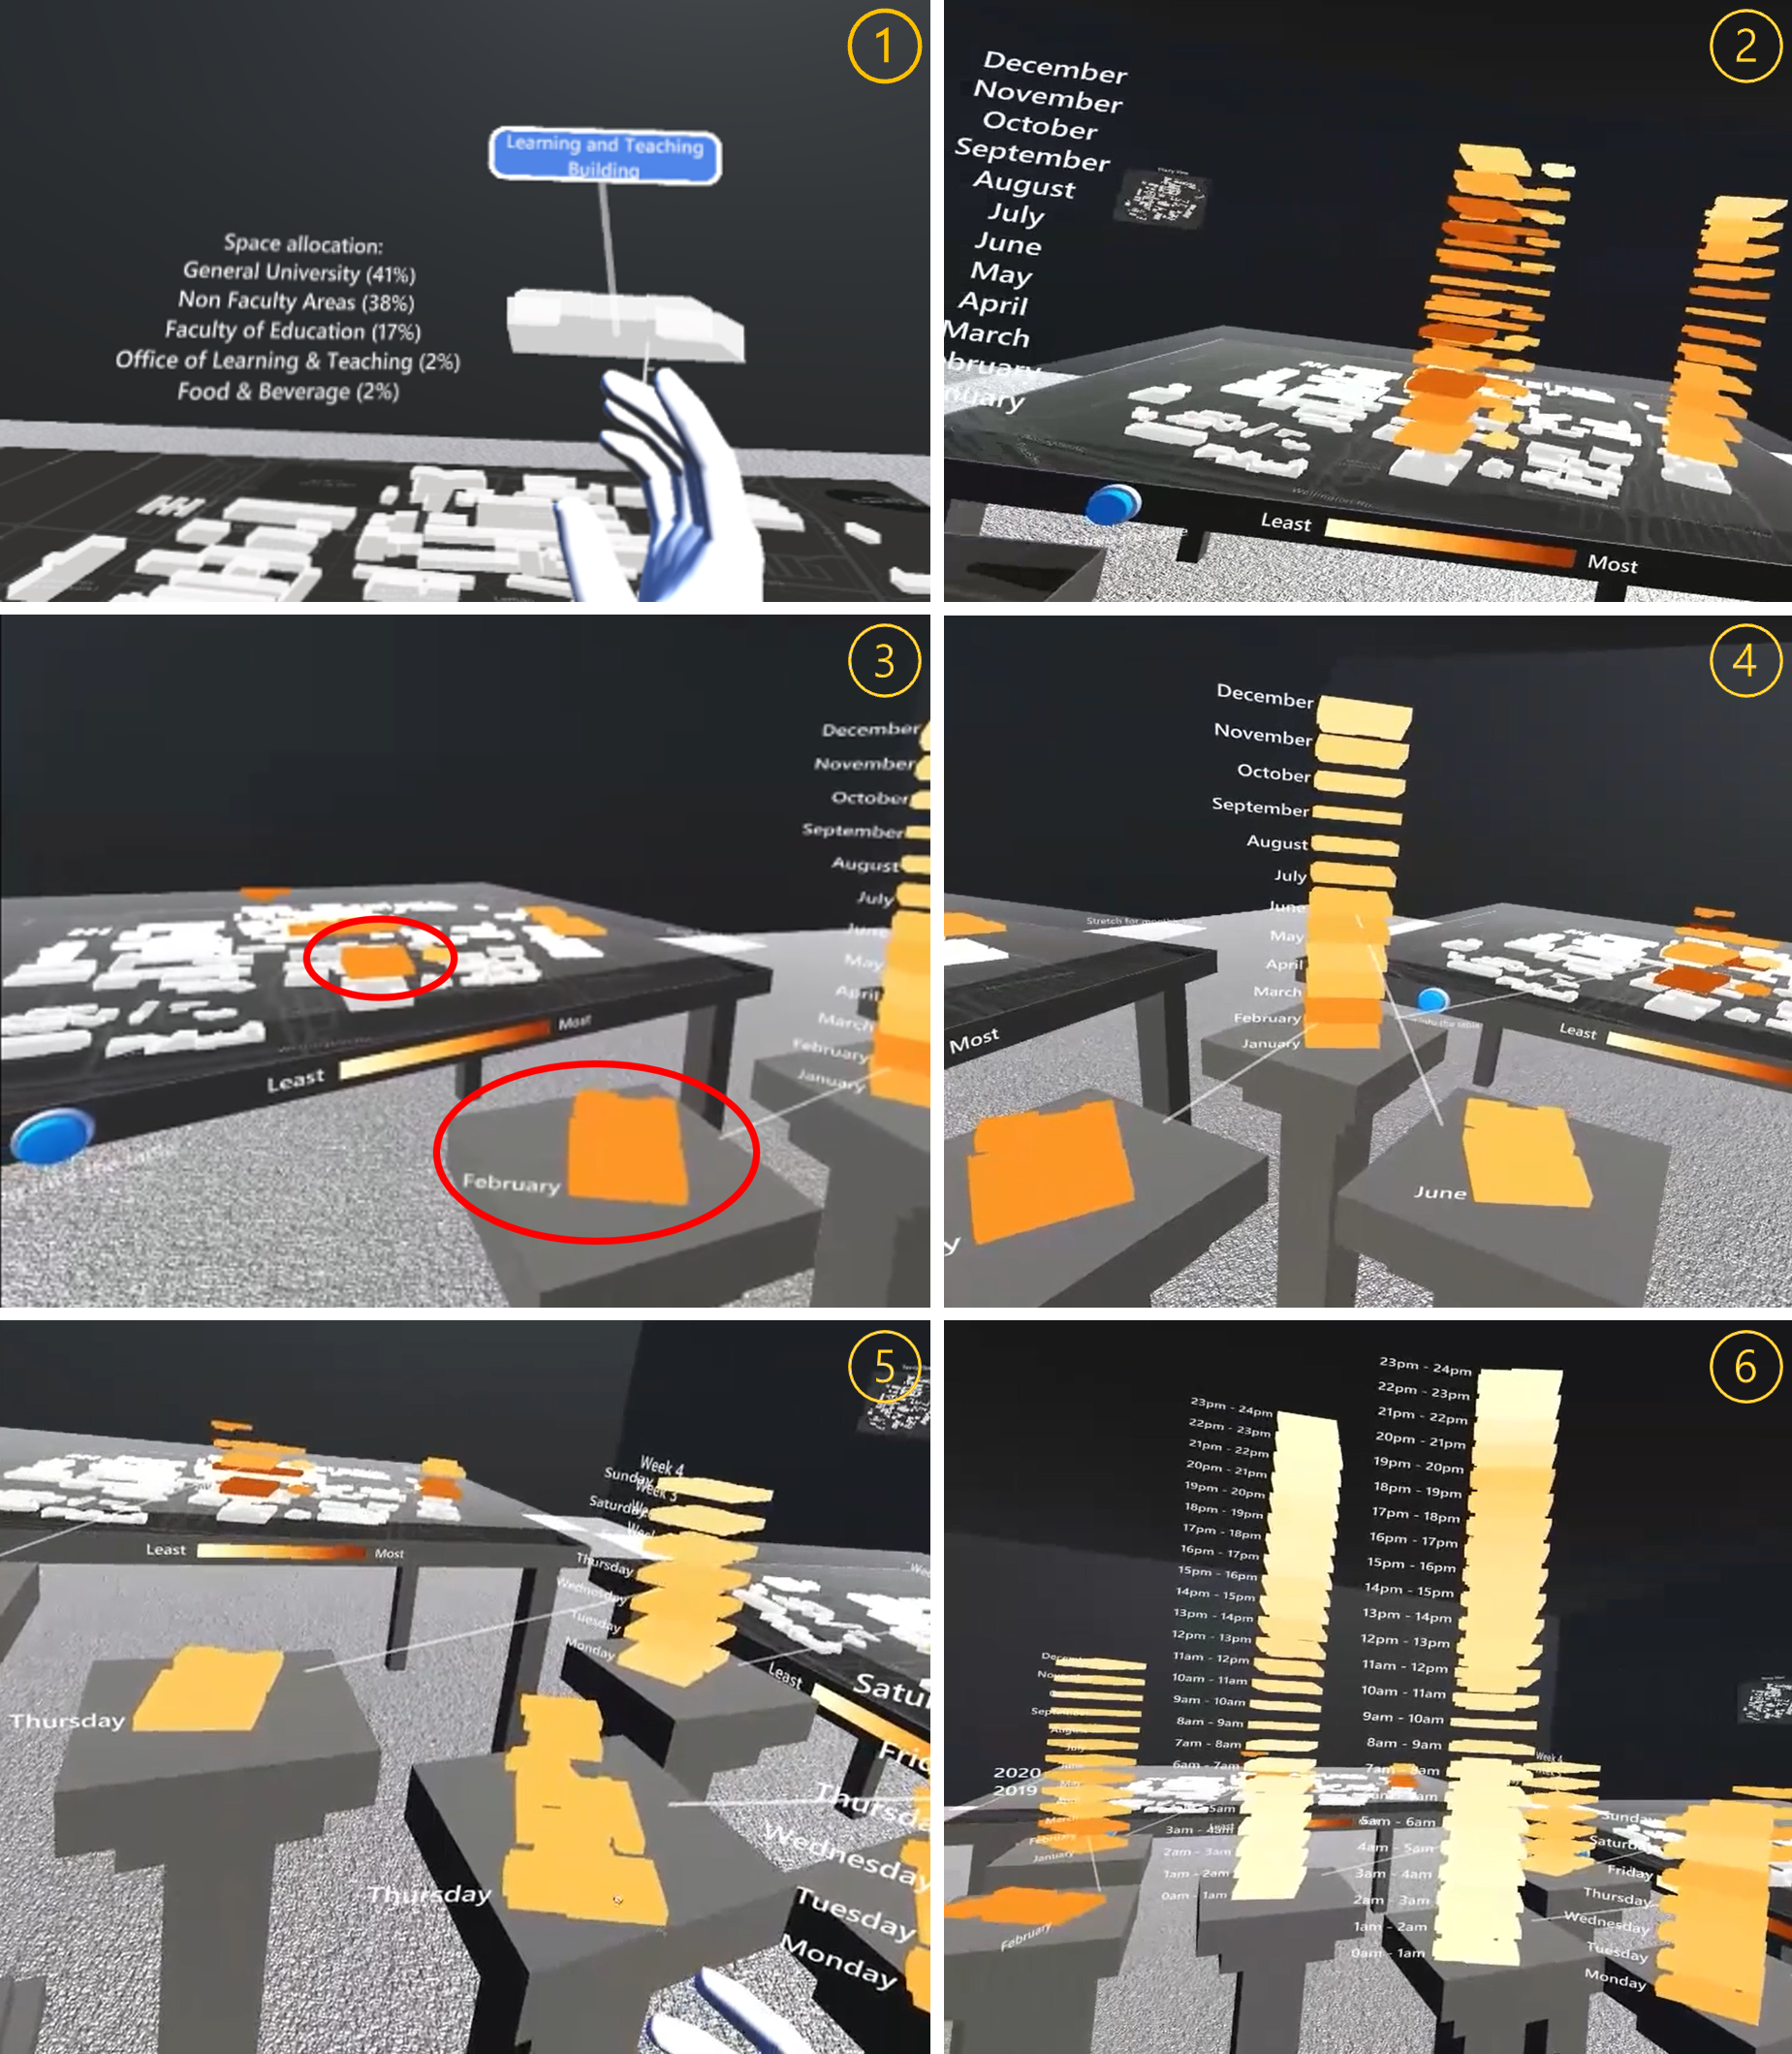 There are six small multiples demonstrating the TimeTables prototype. In Virtual Reality, we can see a table with a map of a campus. 3D representations of the buildings are placing on top of each other to represent different moment in time and their color encode the energy consumption.